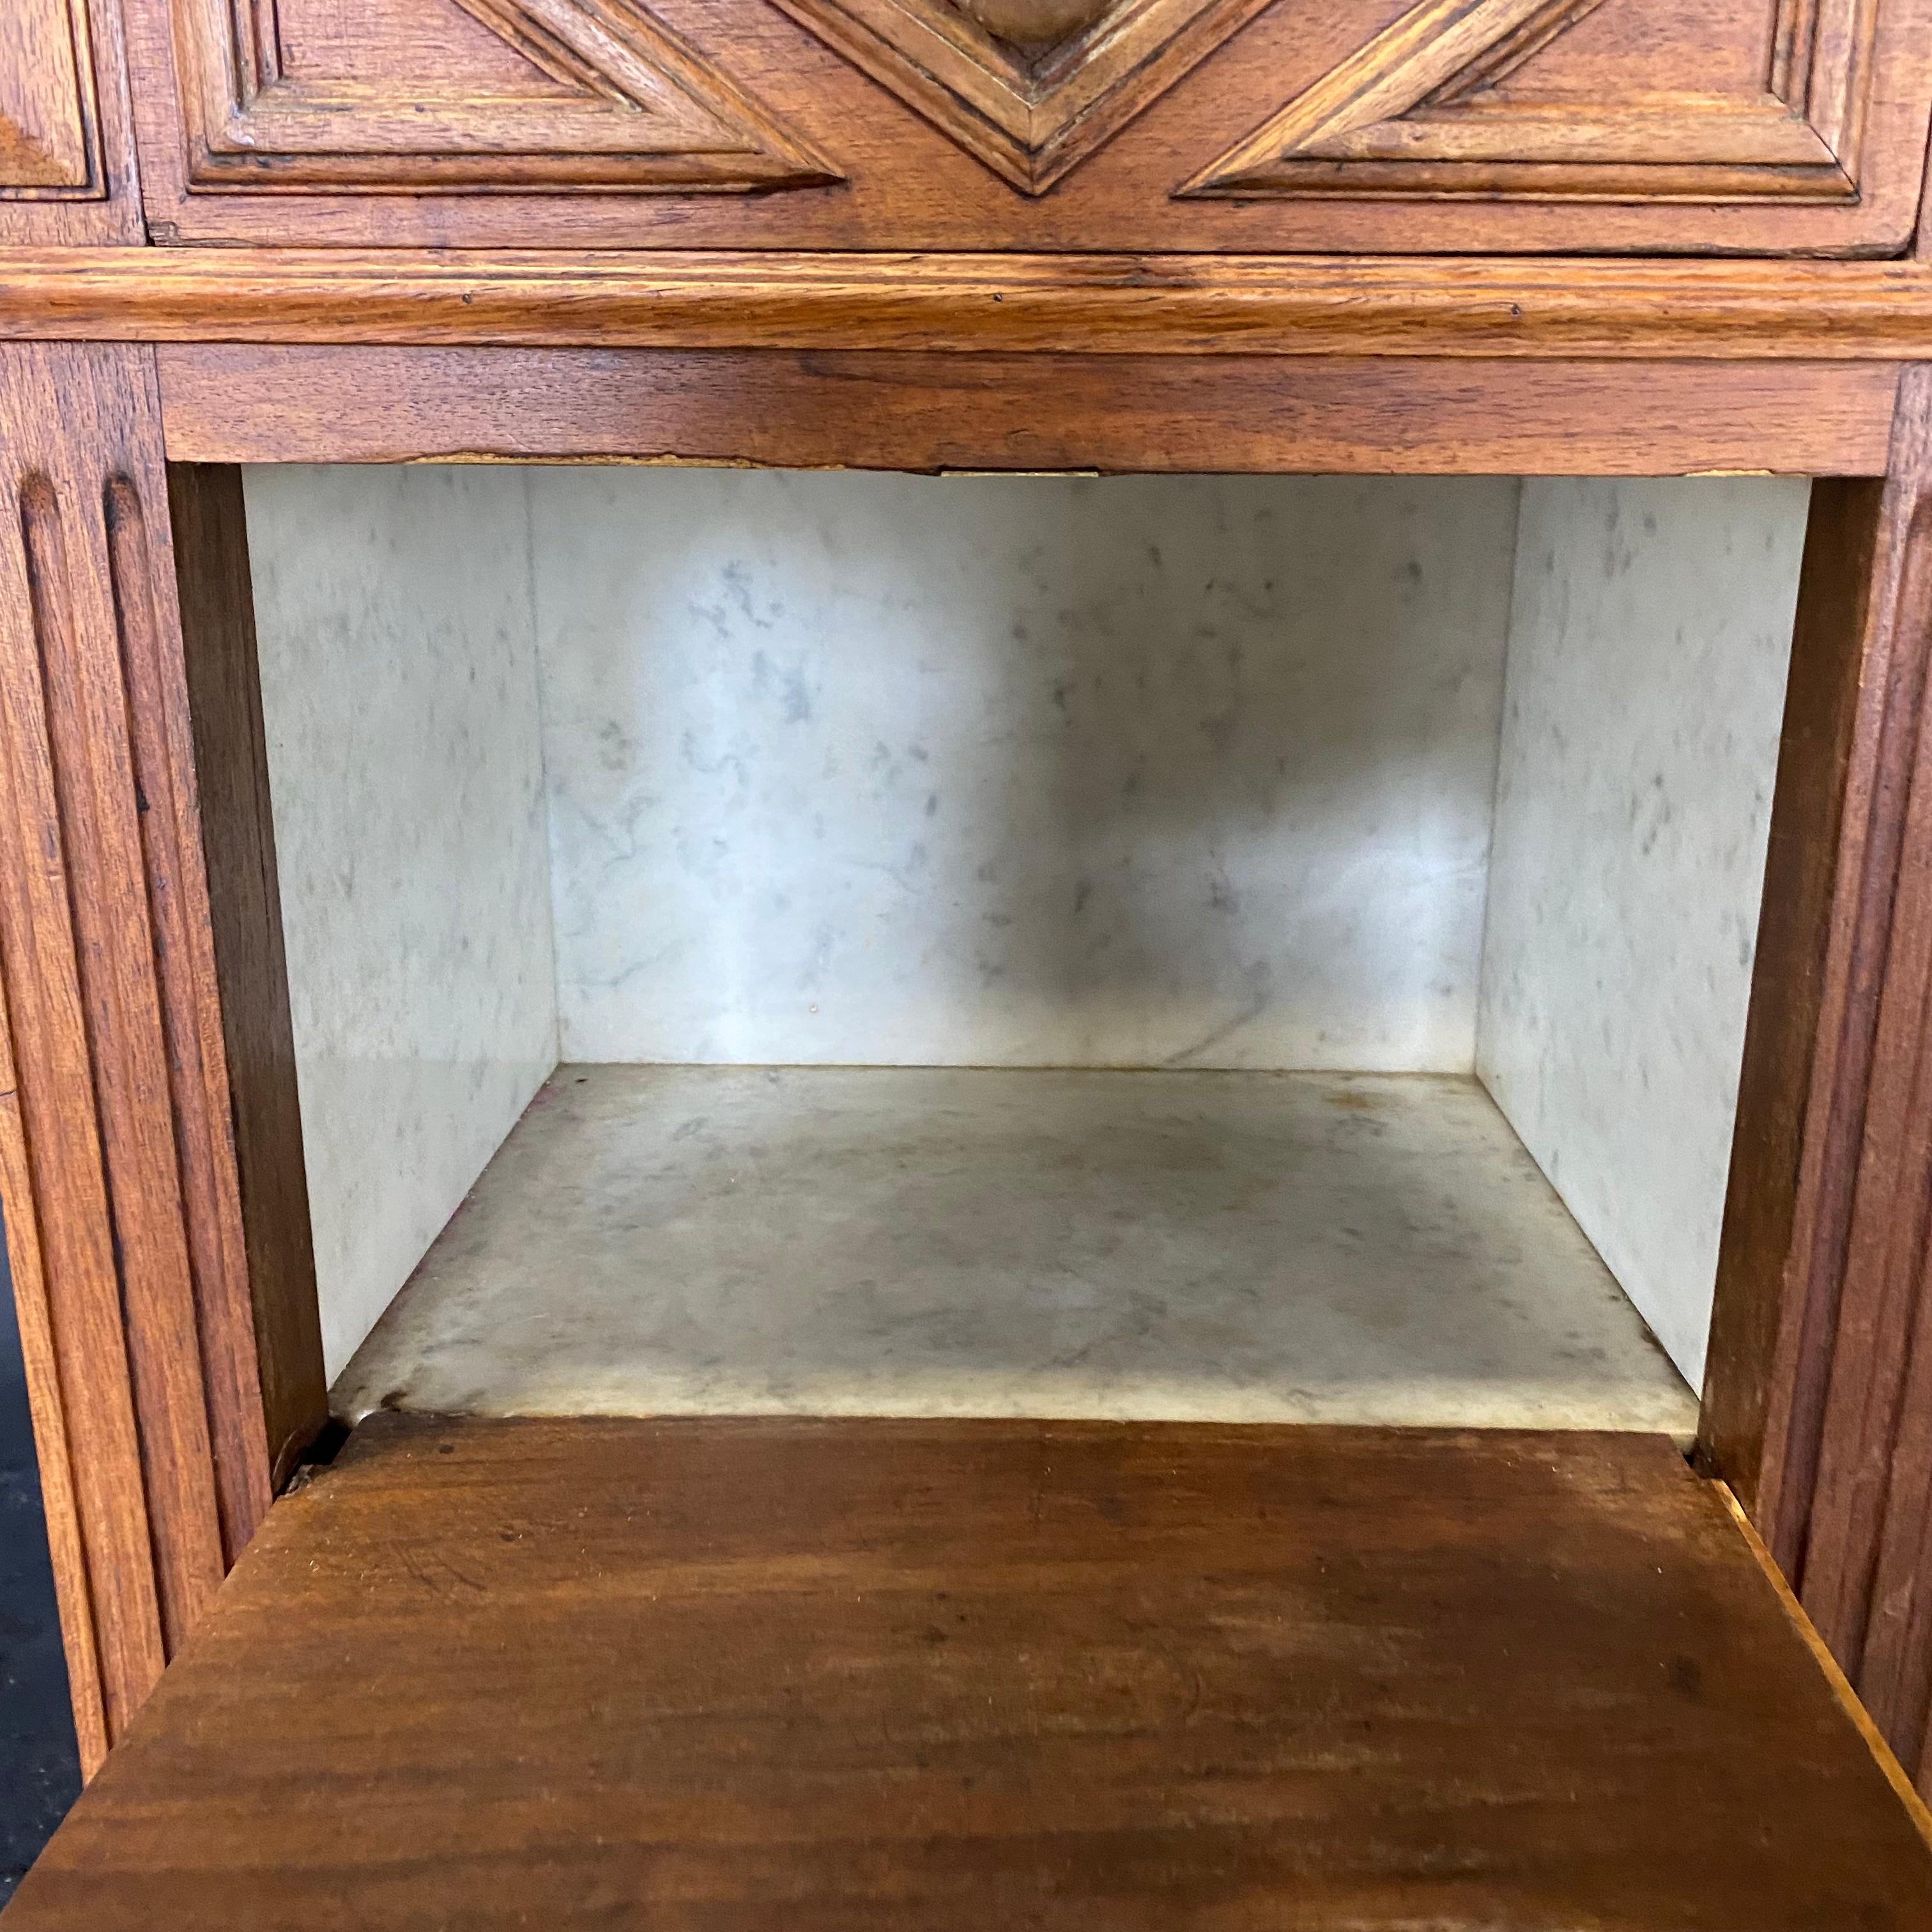 This lovely and functional French oak marble top cabinet can be used as a linen chest, bedside cabinet, nightstand, or side table. The interior compartment is lined with the same carrara marble as the top. Top drawer is accented with diamond